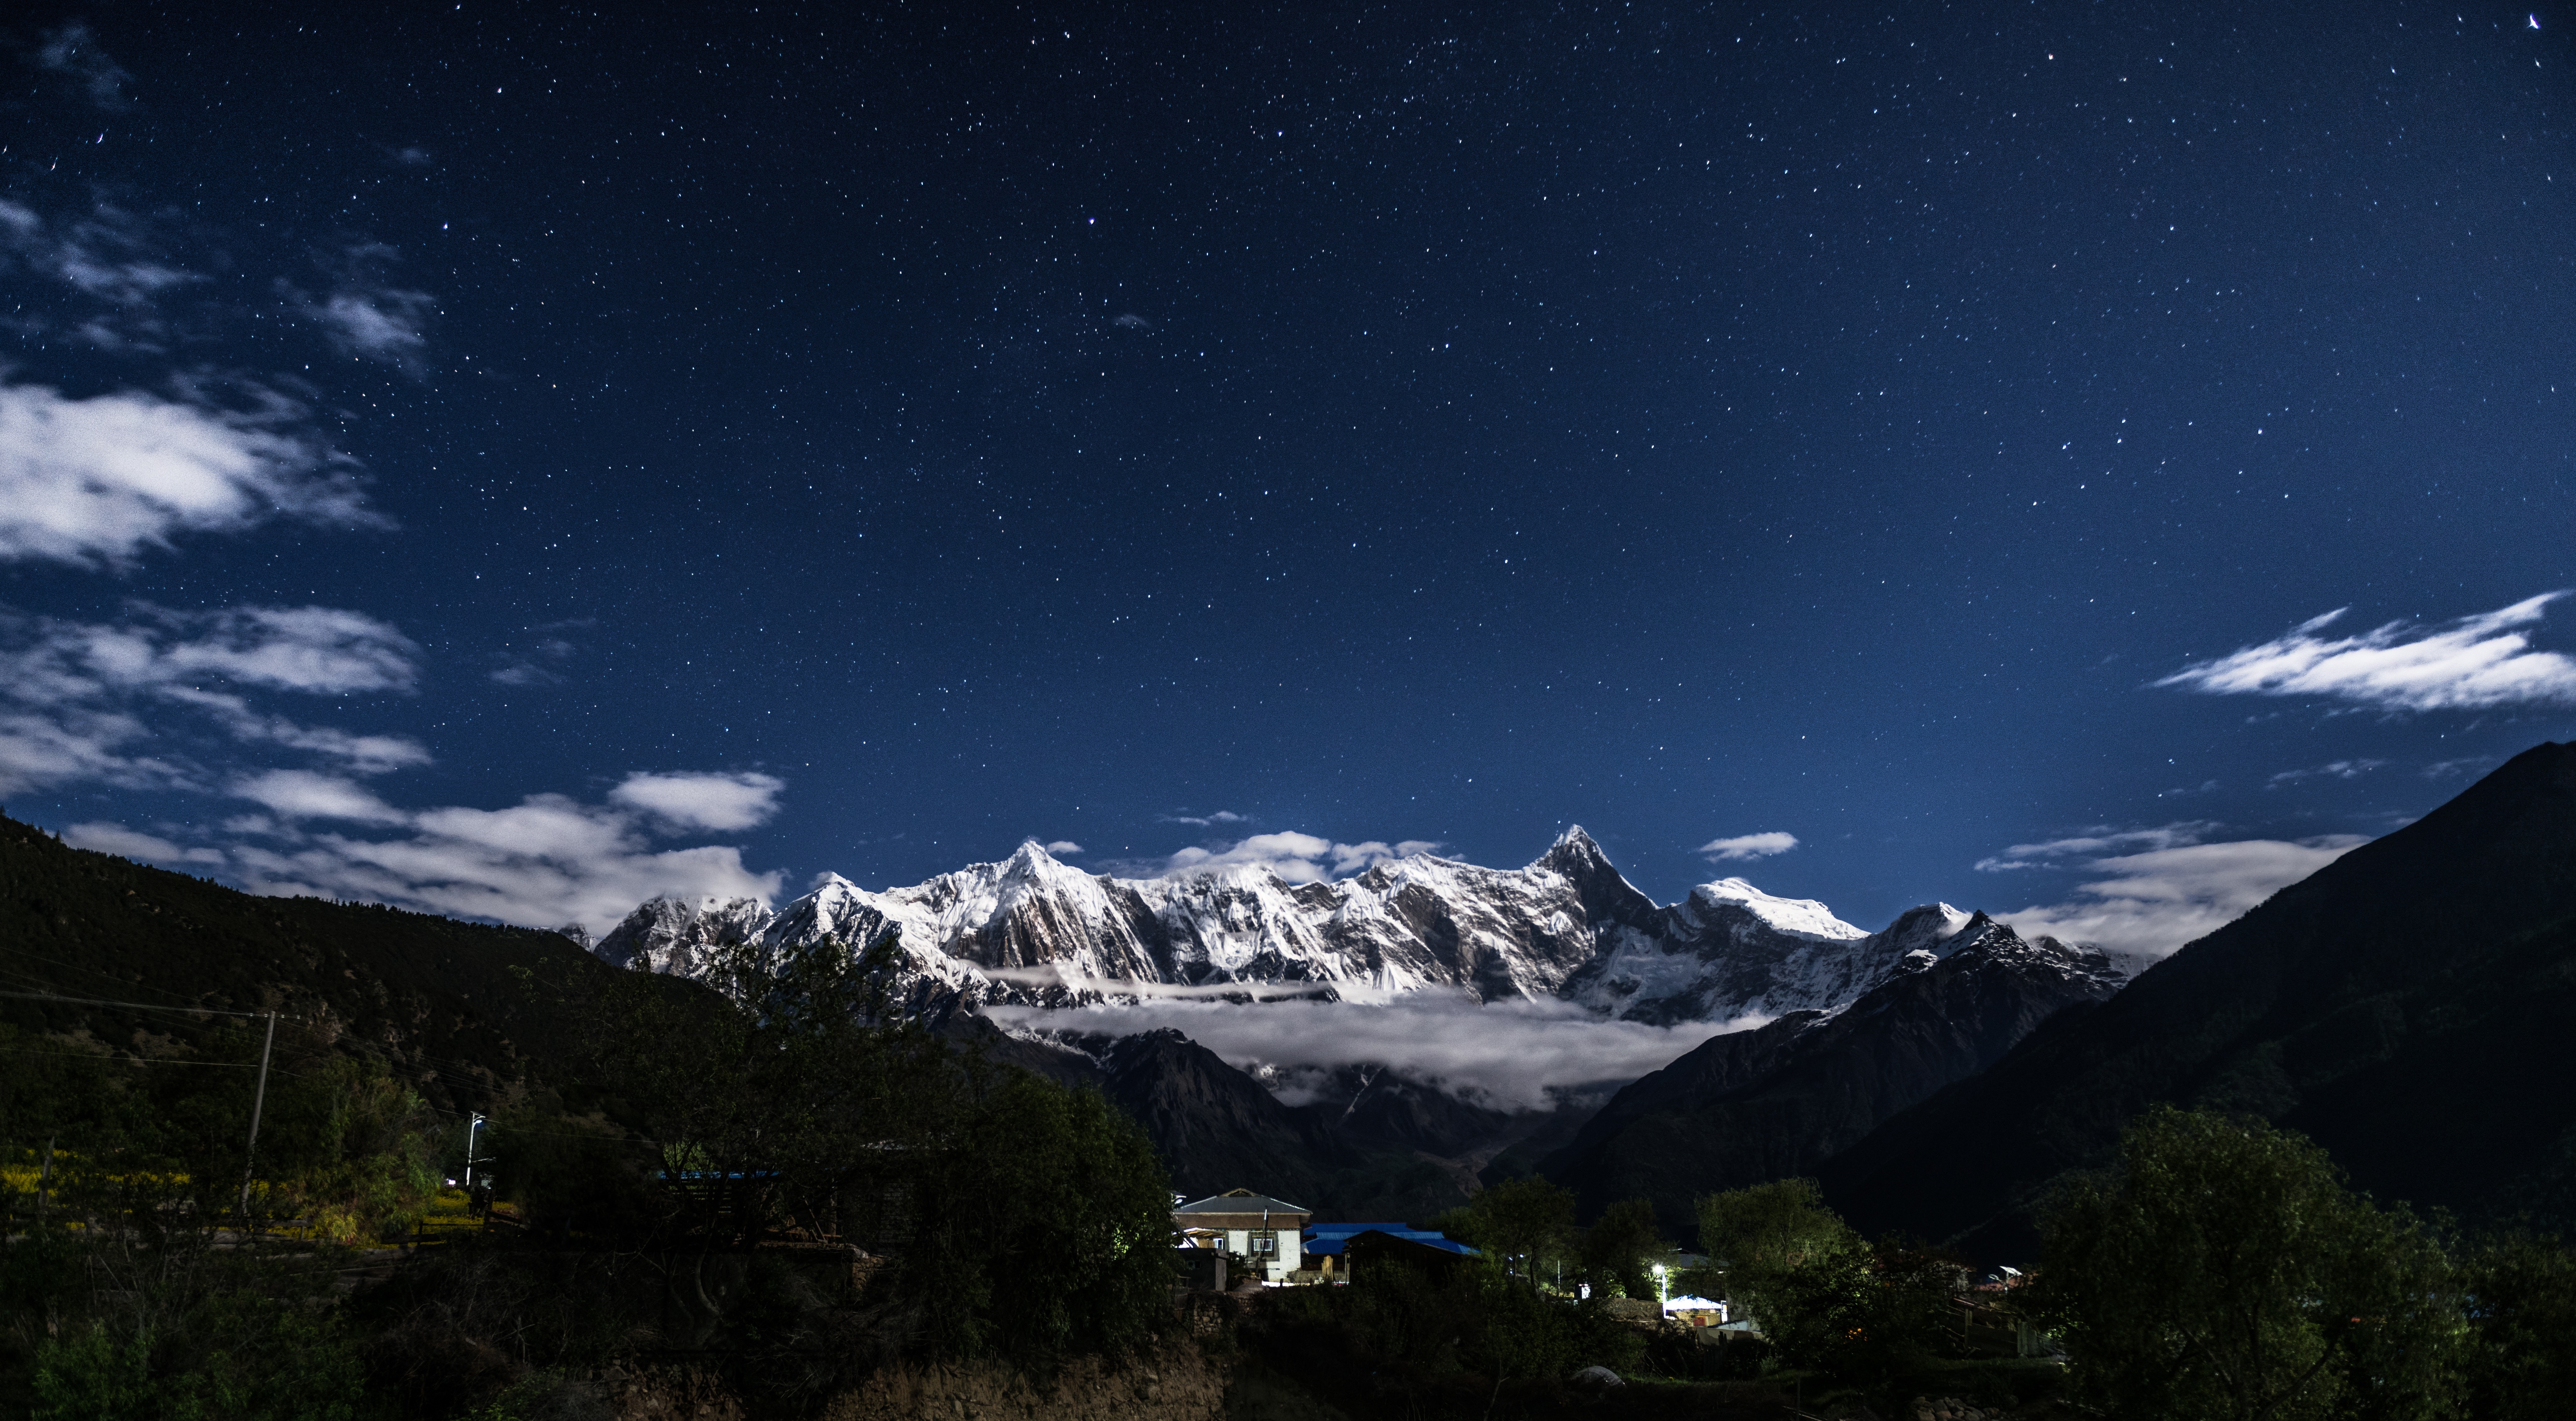 A beautiful starry sky against the backdrop of the mountains in the countryside